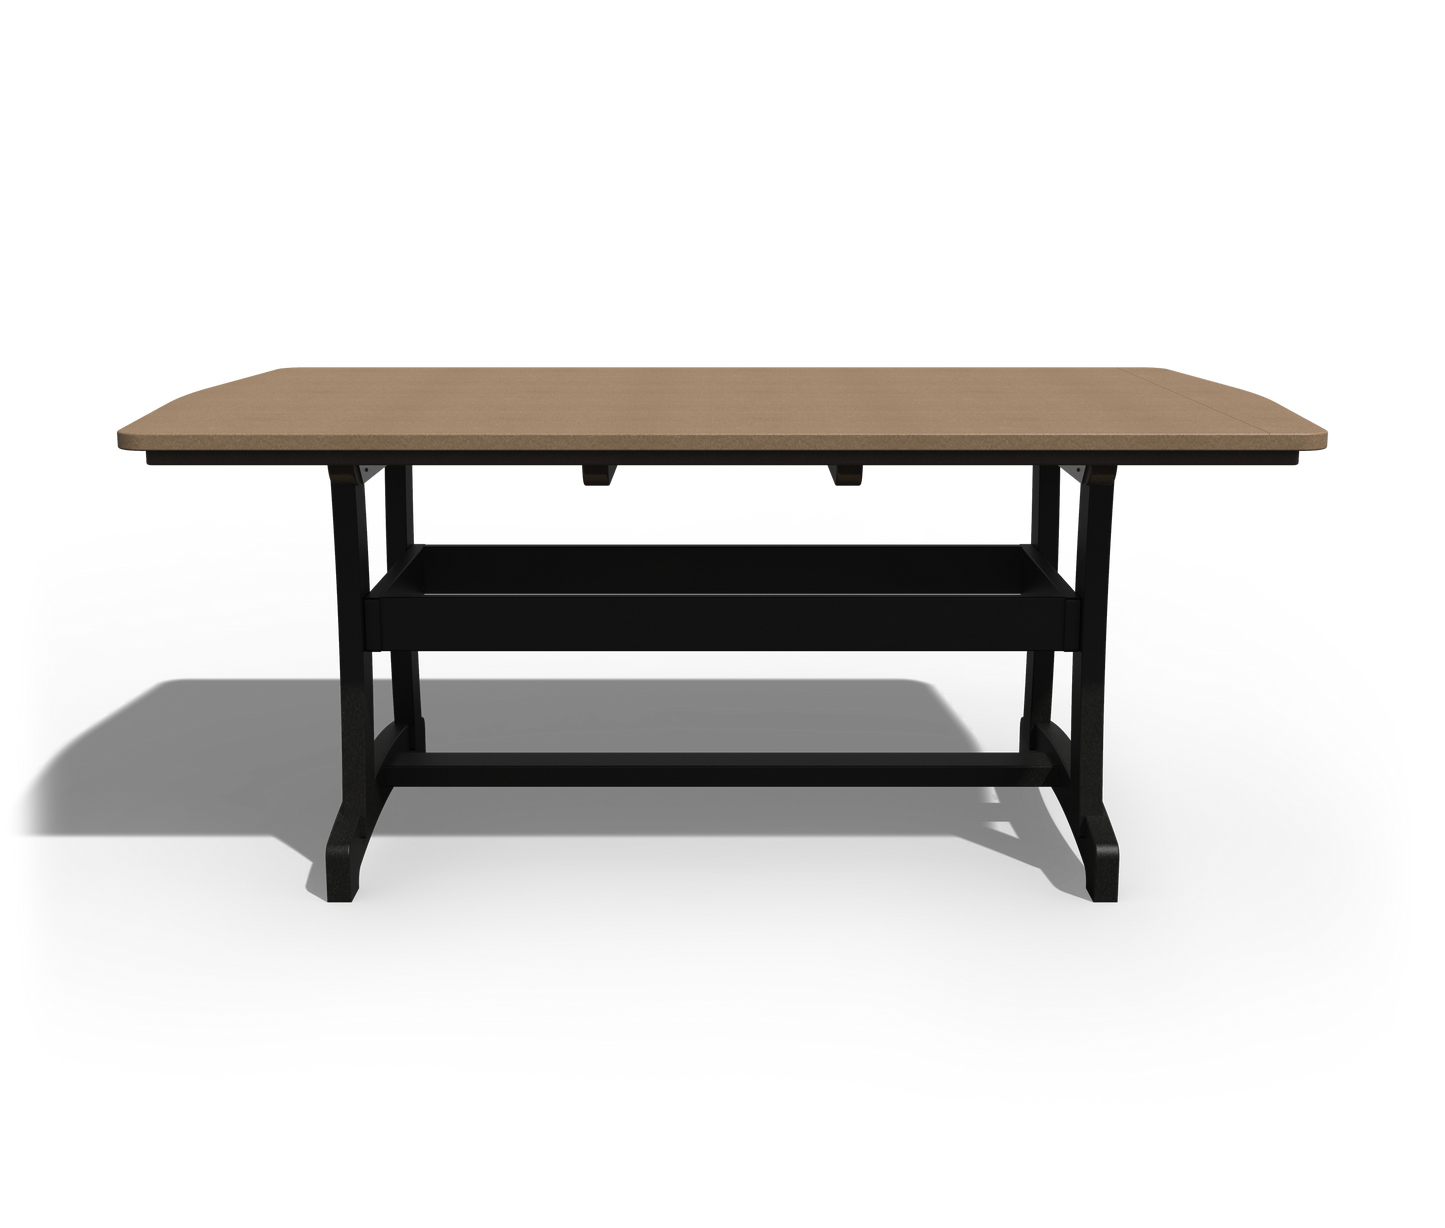 Patiova Recycled Plastic 4'x6' Legacy Dining Table - LEAD TIME TO SHIP 4 WEEKS